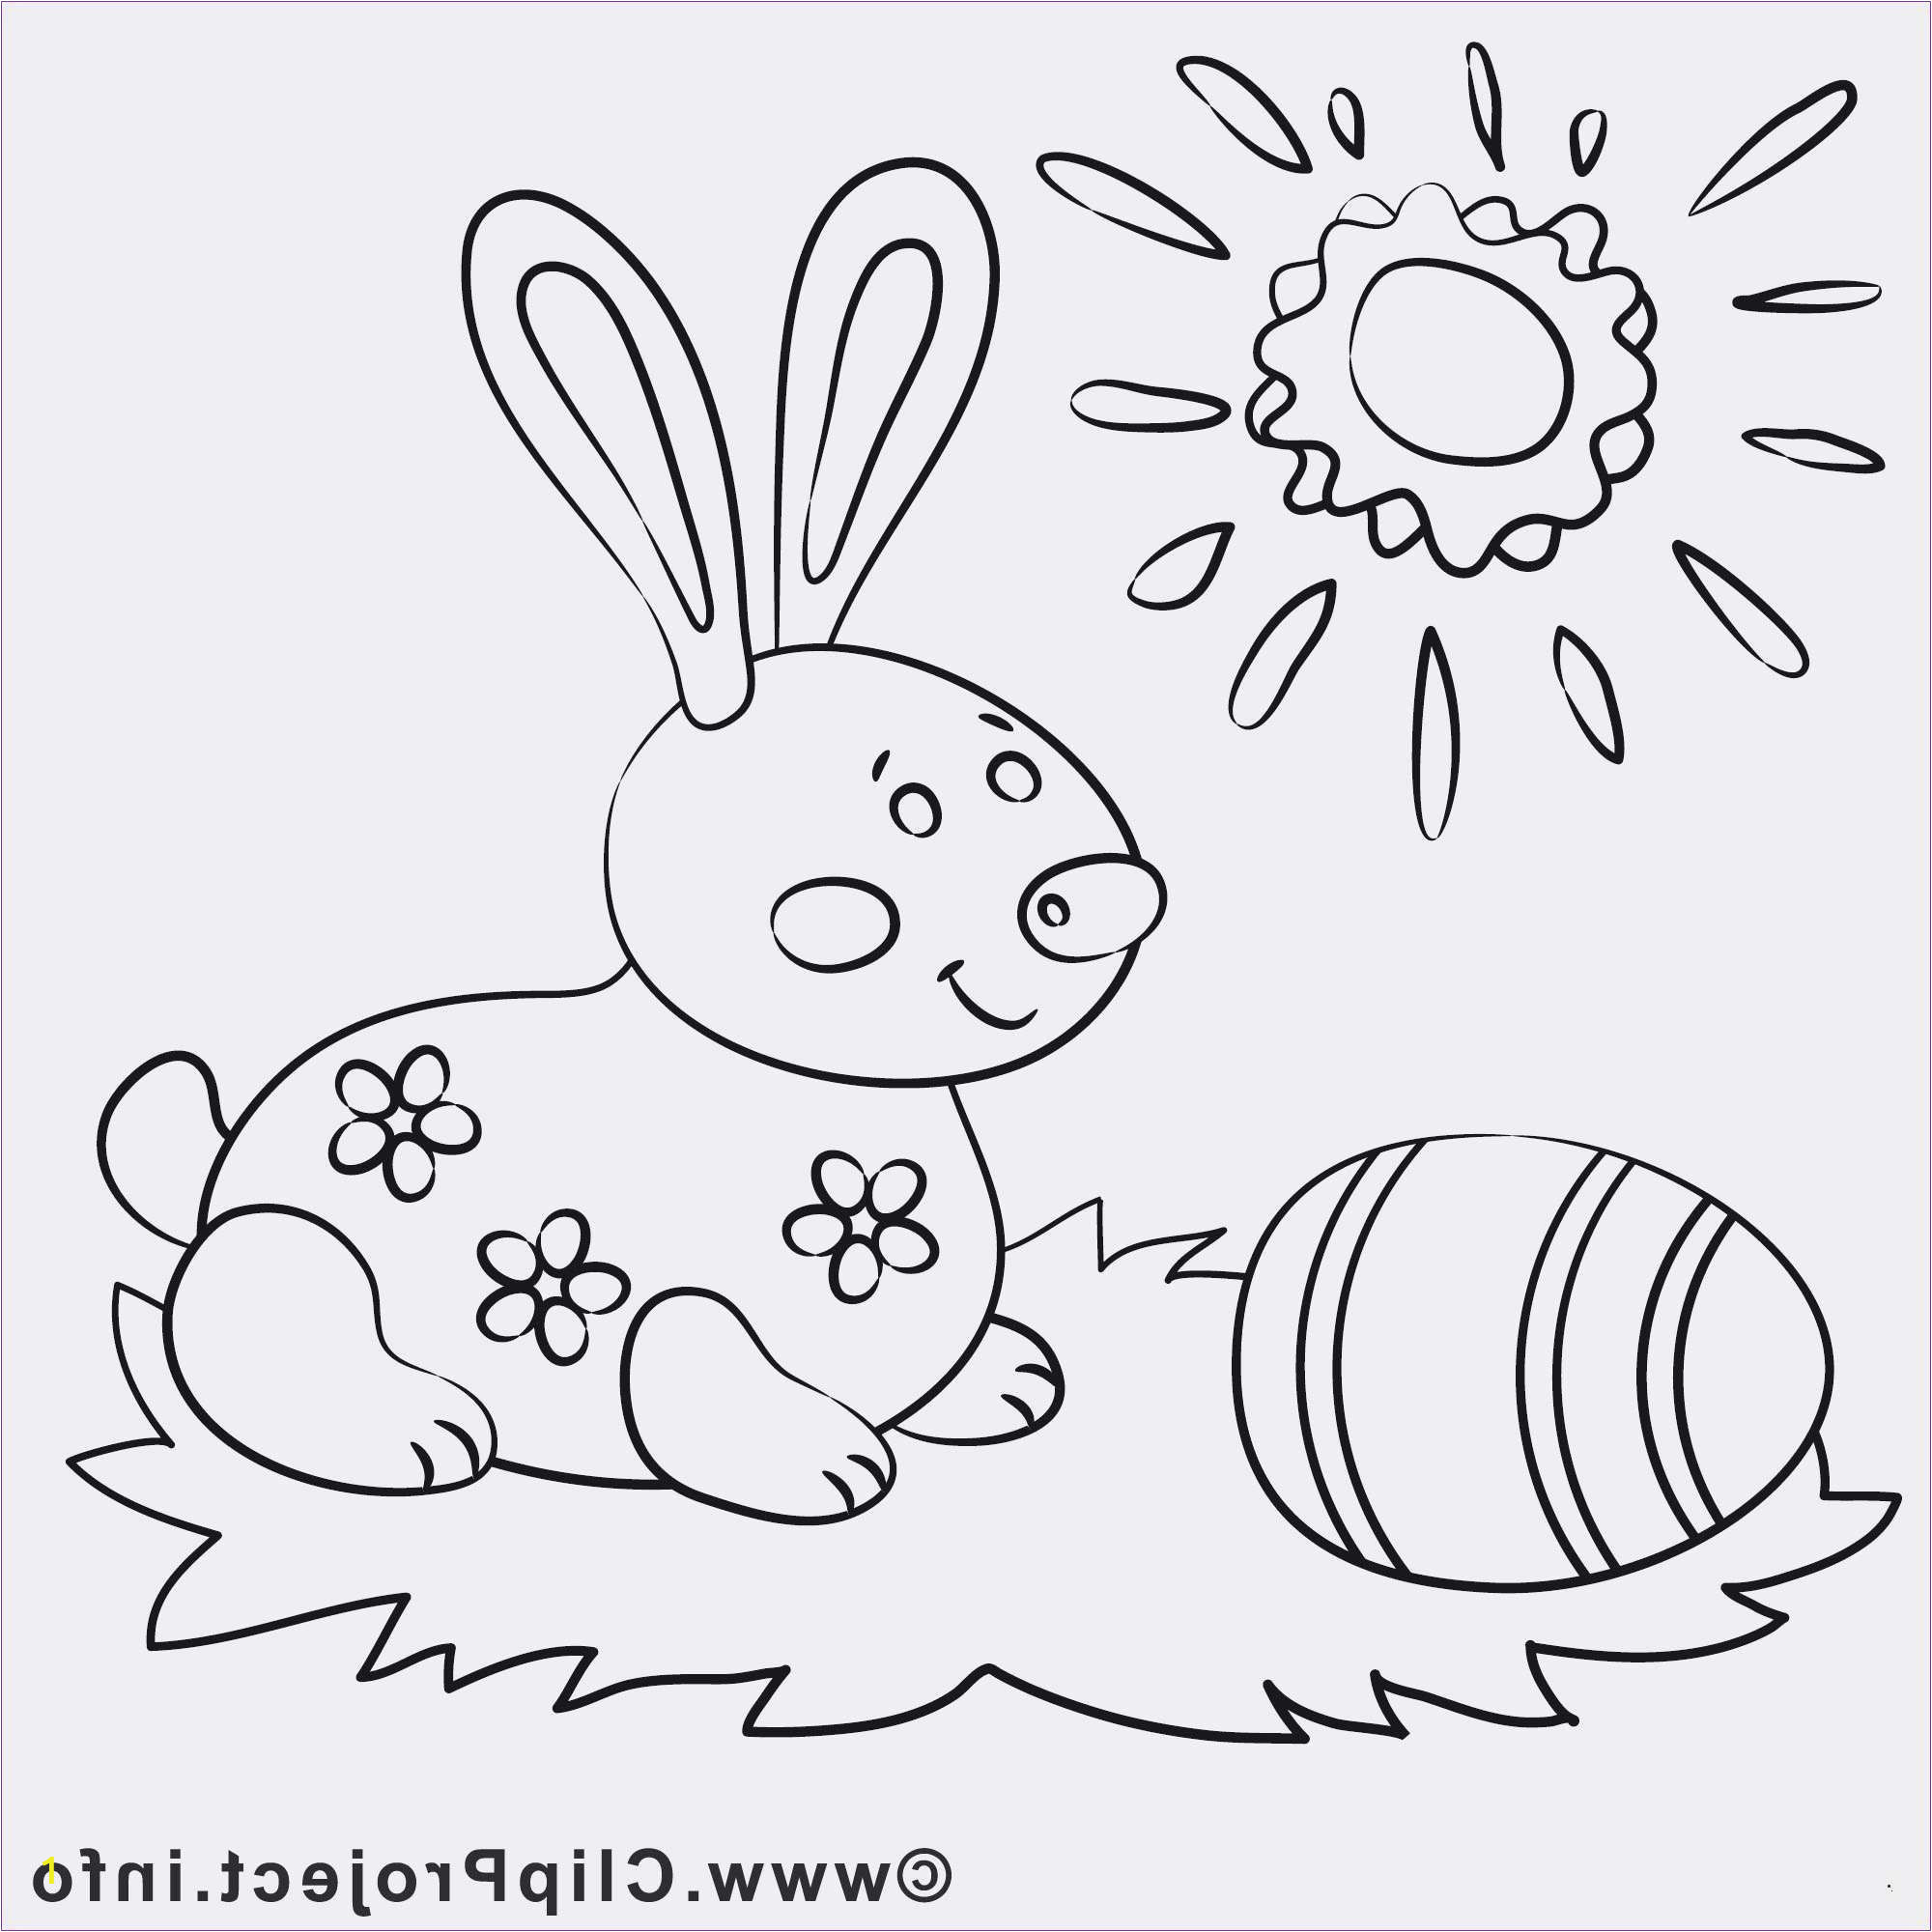 Zoo Animal Coloring Pages Printable 30 Unique Stock Coloring Page Nature